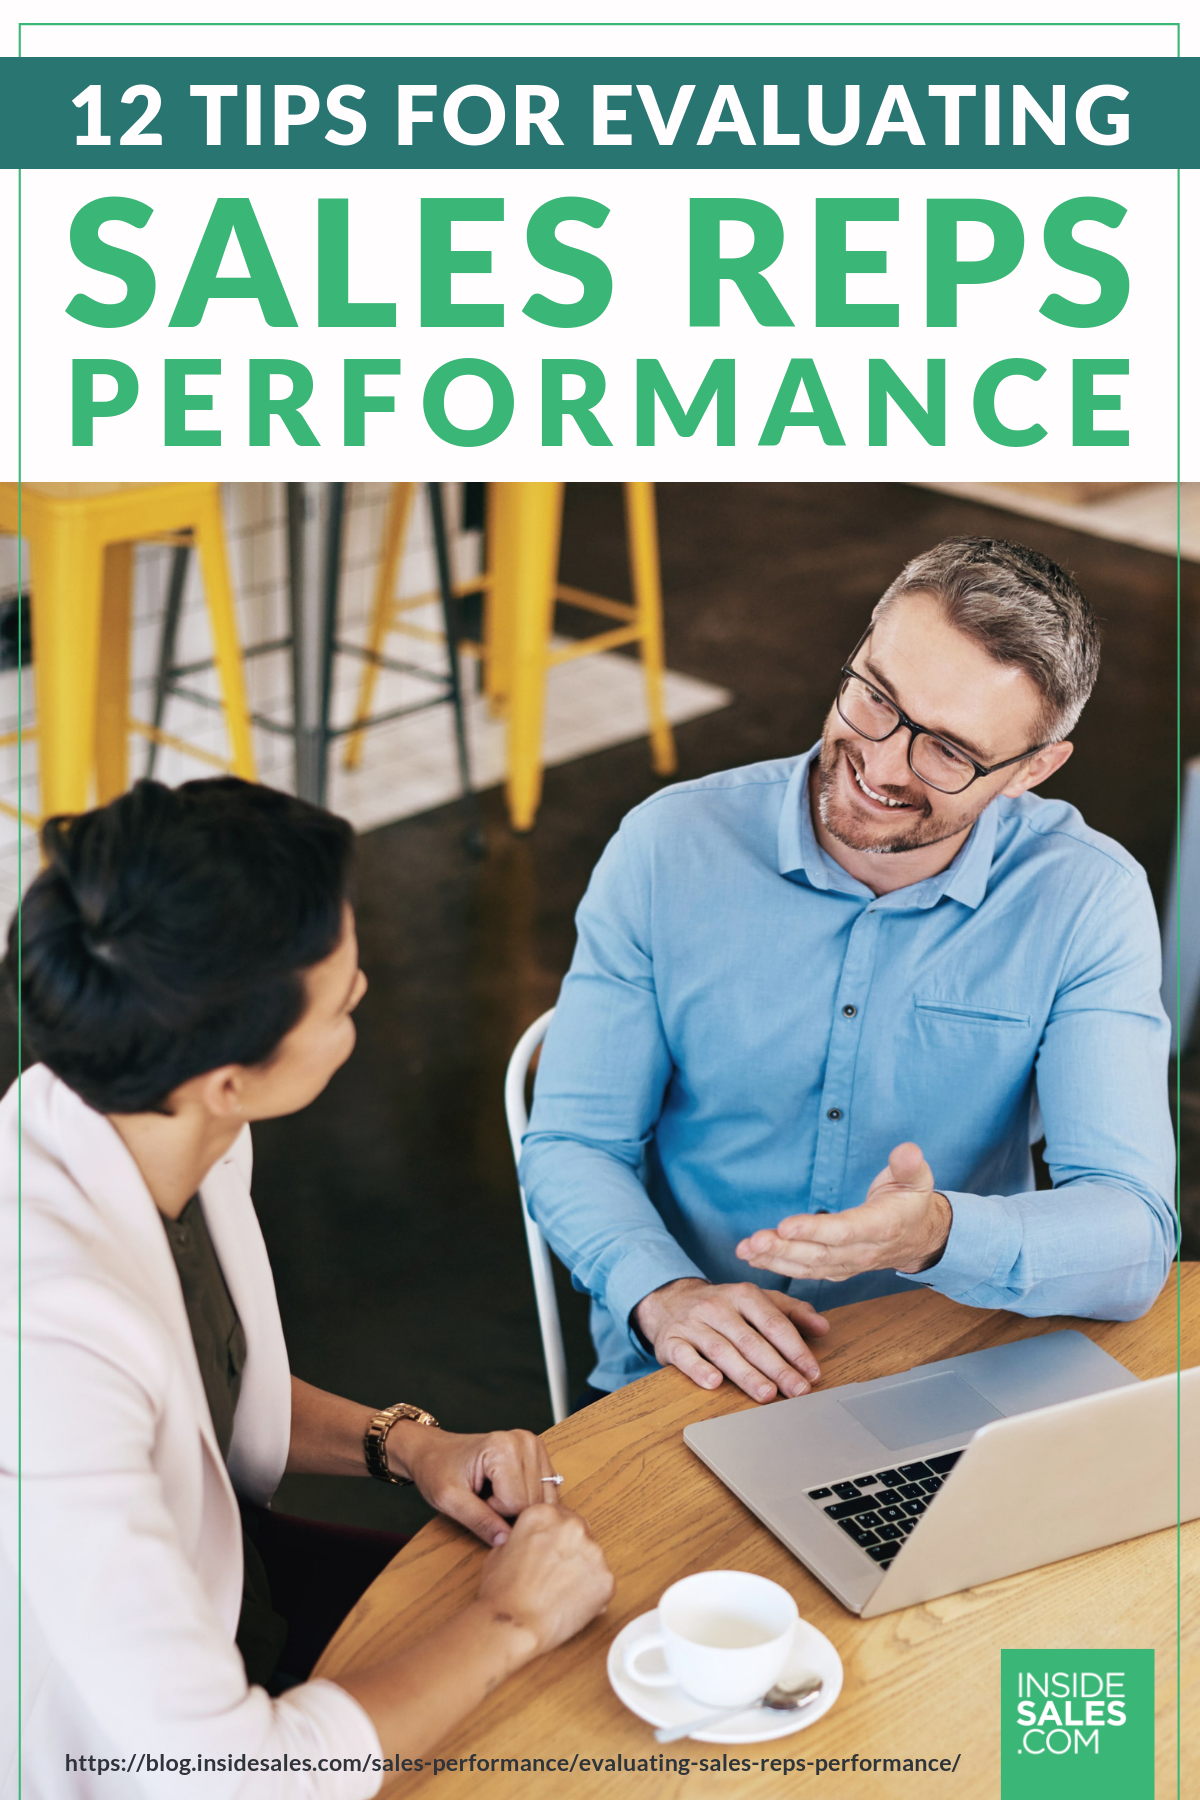 12 Tips For Evaluating Sales Reps Performance https://resources.insidesales.com/blog/sales-performance/evaluating-sales-reps-performance/